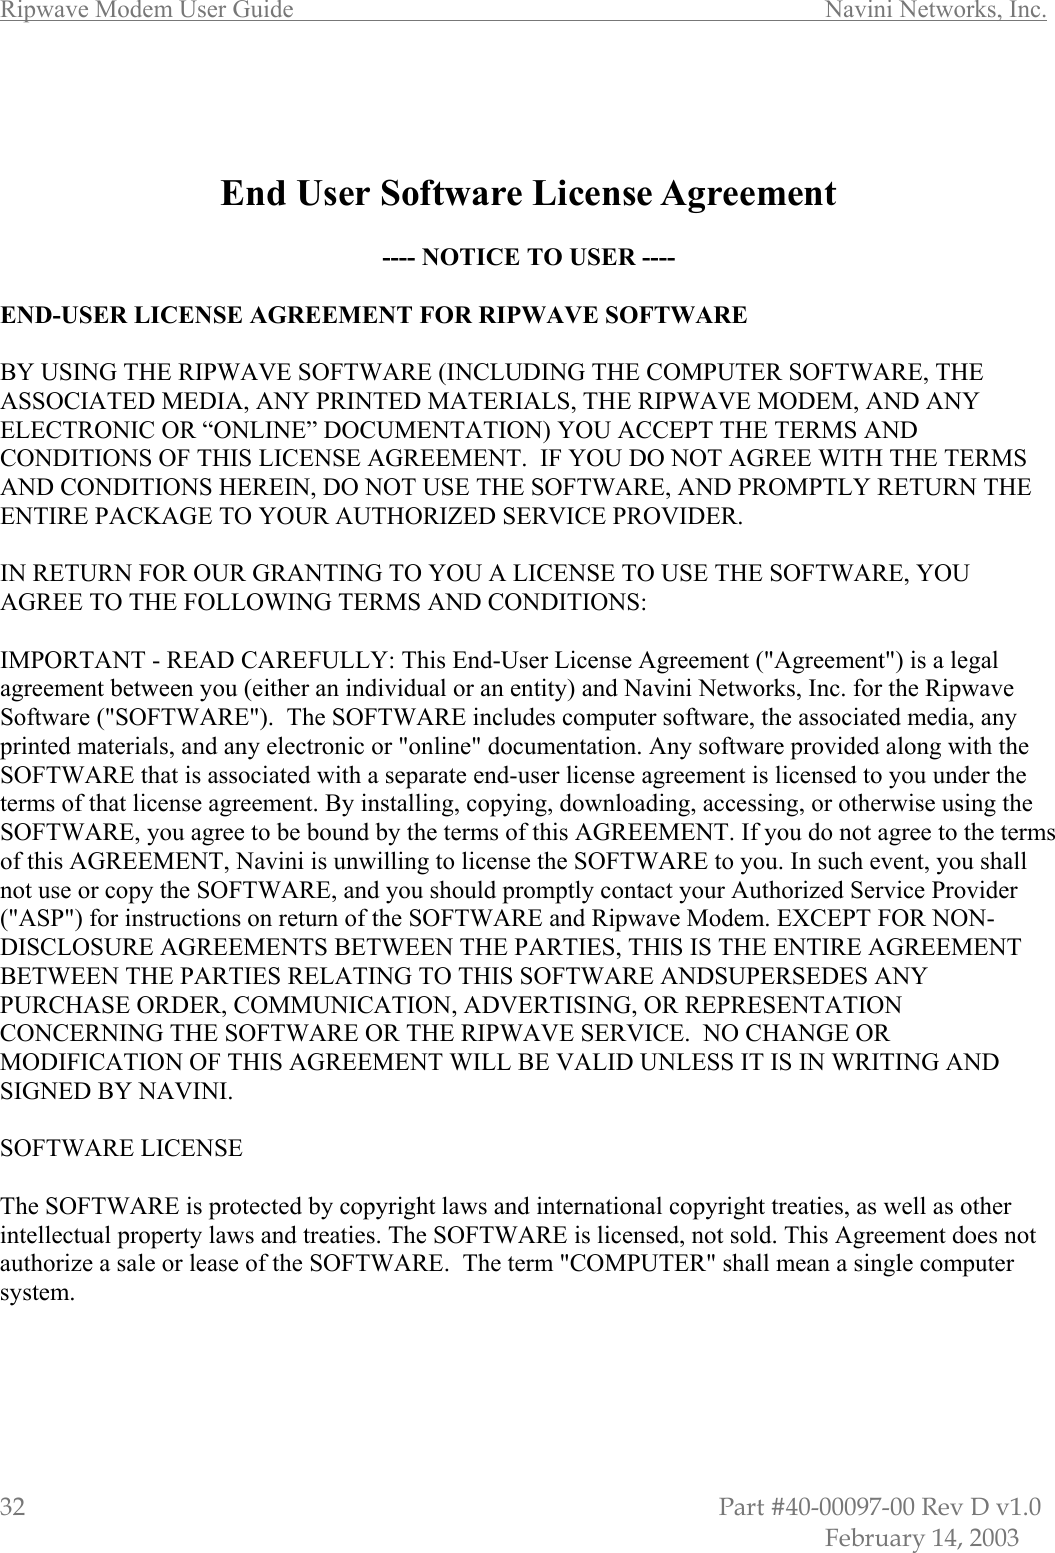 Ripwave Modem User Guide        Navini Networks, Inc. 32                         Part #40-00097-00 Rev D v1.0            February 14, 2003    End User Software License Agreement  ---- NOTICE TO USER ----  END-USER LICENSE AGREEMENT FOR RIPWAVE SOFTWARE  BY USING THE RIPWAVE SOFTWARE (INCLUDING THE COMPUTER SOFTWARE, THE ASSOCIATED MEDIA, ANY PRINTED MATERIALS, THE RIPWAVE MODEM, AND ANY ELECTRONIC OR “ONLINE” DOCUMENTATION) YOU ACCEPT THE TERMS AND CONDITIONS OF THIS LICENSE AGREEMENT.  IF YOU DO NOT AGREE WITH THE TERMS AND CONDITIONS HEREIN, DO NOT USE THE SOFTWARE, AND PROMPTLY RETURN THE ENTIRE PACKAGE TO YOUR AUTHORIZED SERVICE PROVIDER.  IN RETURN FOR OUR GRANTING TO YOU A LICENSE TO USE THE SOFTWARE, YOU AGREE TO THE FOLLOWING TERMS AND CONDITIONS:  IMPORTANT - READ CAREFULLY: This End-User License Agreement (&quot;Agreement&quot;) is a legal agreement between you (either an individual or an entity) and Navini Networks, Inc. for the Ripwave Software (&quot;SOFTWARE&quot;).  The SOFTWARE includes computer software, the associated media, any printed materials, and any electronic or &quot;online&quot; documentation. Any software provided along with the SOFTWARE that is associated with a separate end-user license agreement is licensed to you under the terms of that license agreement. By installing, copying, downloading, accessing, or otherwise using the SOFTWARE, you agree to be bound by the terms of this AGREEMENT. If you do not agree to the terms of this AGREEMENT, Navini is unwilling to license the SOFTWARE to you. In such event, you shall not use or copy the SOFTWARE, and you should promptly contact your Authorized Service Provider (&quot;ASP&quot;) for instructions on return of the SOFTWARE and Ripwave Modem. EXCEPT FOR NON-DISCLOSURE AGREEMENTS BETWEEN THE PARTIES, THIS IS THE ENTIRE AGREEMENT BETWEEN THE PARTIES RELATING TO THIS SOFTWARE ANDSUPERSEDES ANY PURCHASE ORDER, COMMUNICATION, ADVERTISING, OR REPRESENTATION CONCERNING THE SOFTWARE OR THE RIPWAVE SERVICE.  NO CHANGE OR MODIFICATION OF THIS AGREEMENT WILL BE VALID UNLESS IT IS IN WRITING AND SIGNED BY NAVINI.  SOFTWARE LICENSE  The SOFTWARE is protected by copyright laws and international copyright treaties, as well as other intellectual property laws and treaties. The SOFTWARE is licensed, not sold. This Agreement does not authorize a sale or lease of the SOFTWARE.  The term &quot;COMPUTER&quot; shall mean a single computer system.   